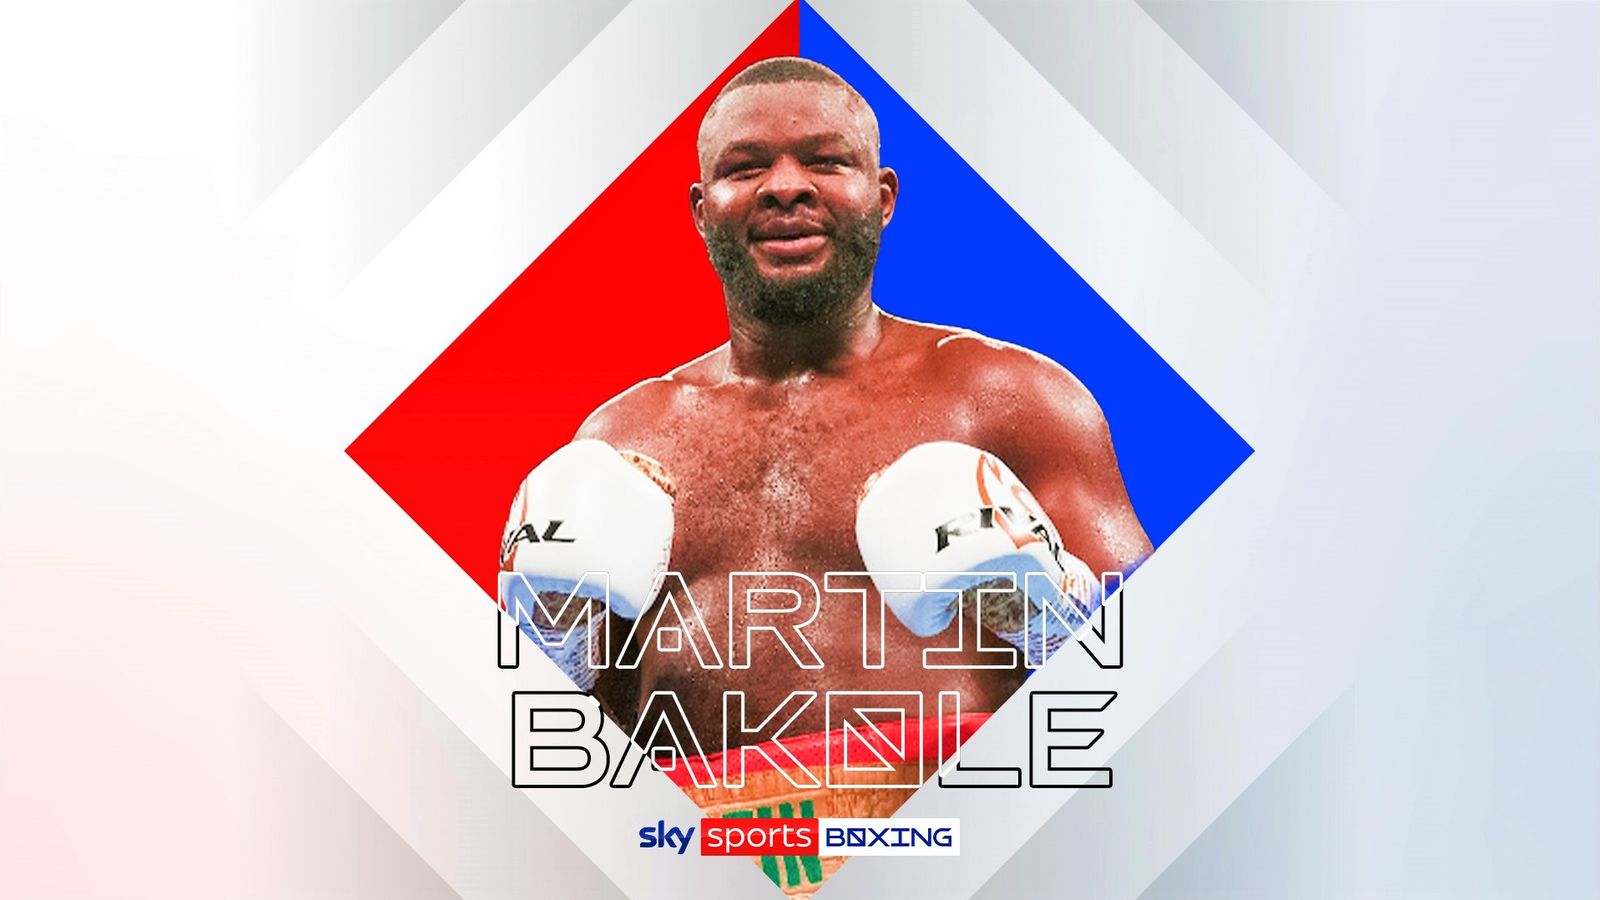 Bakole signs for BOXXER | 'Heavyweights can run but they can't hide!'